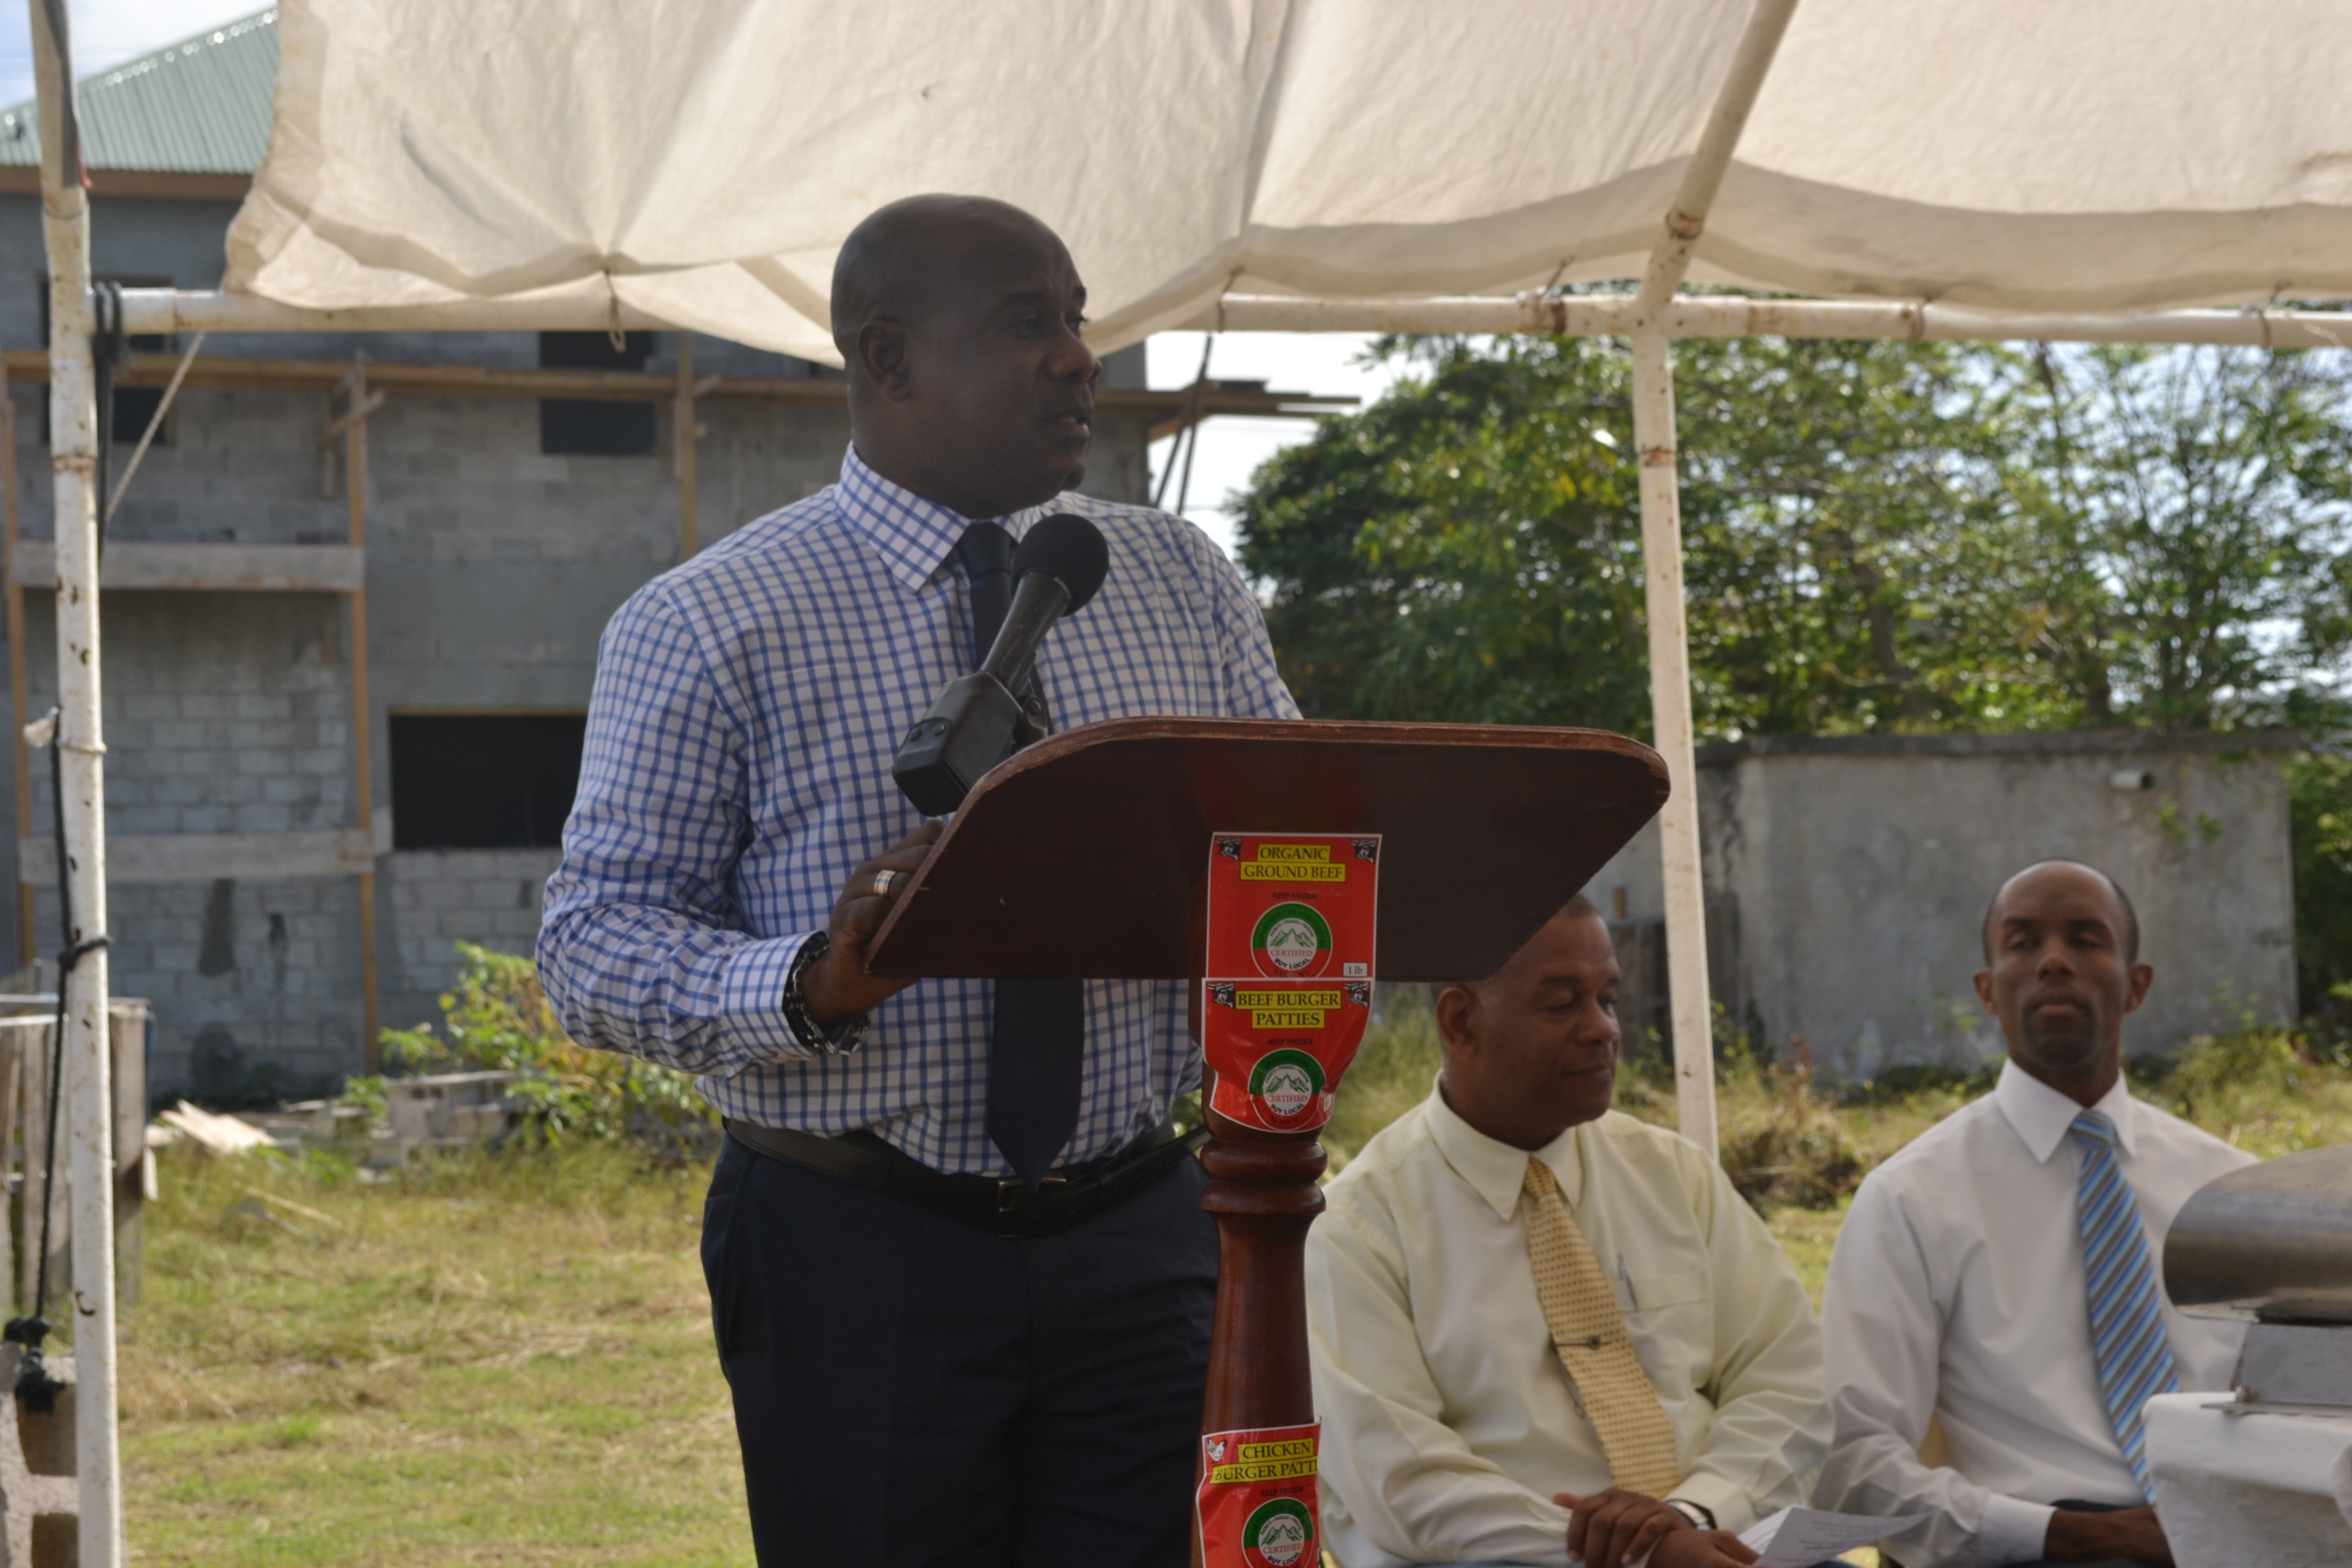 Minister of Agriculture Hon. Alexis Jeffers making remarks at the Ground Breaking Ceremony for the extension of the Abattoir Division on the Abattoir Division Grounds on January 26 2016